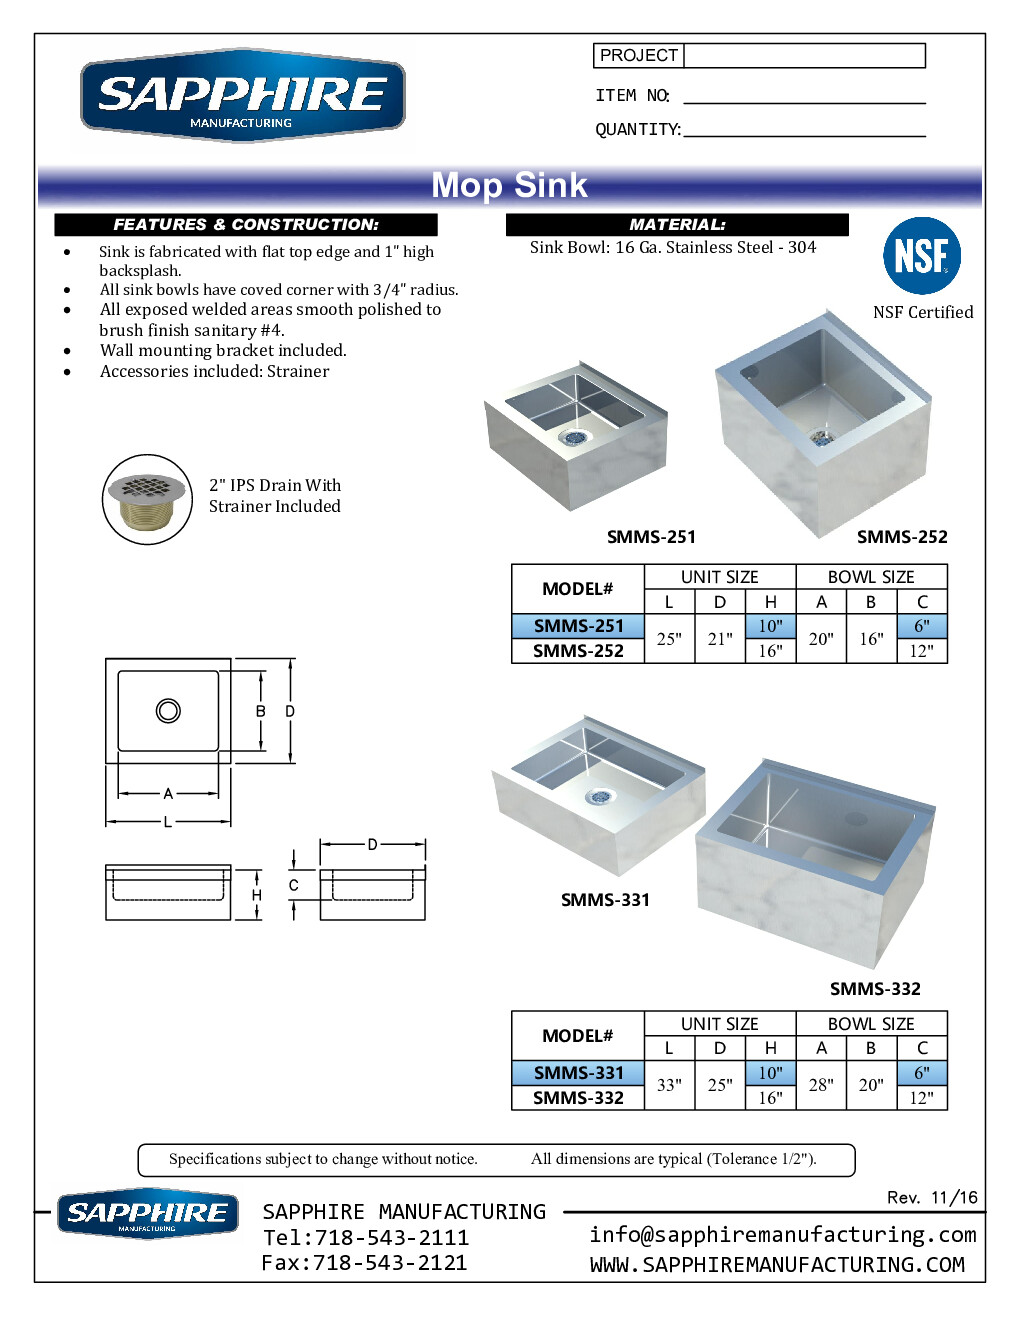 Sapphire Manufacturing SMMS-251 Mop Sink